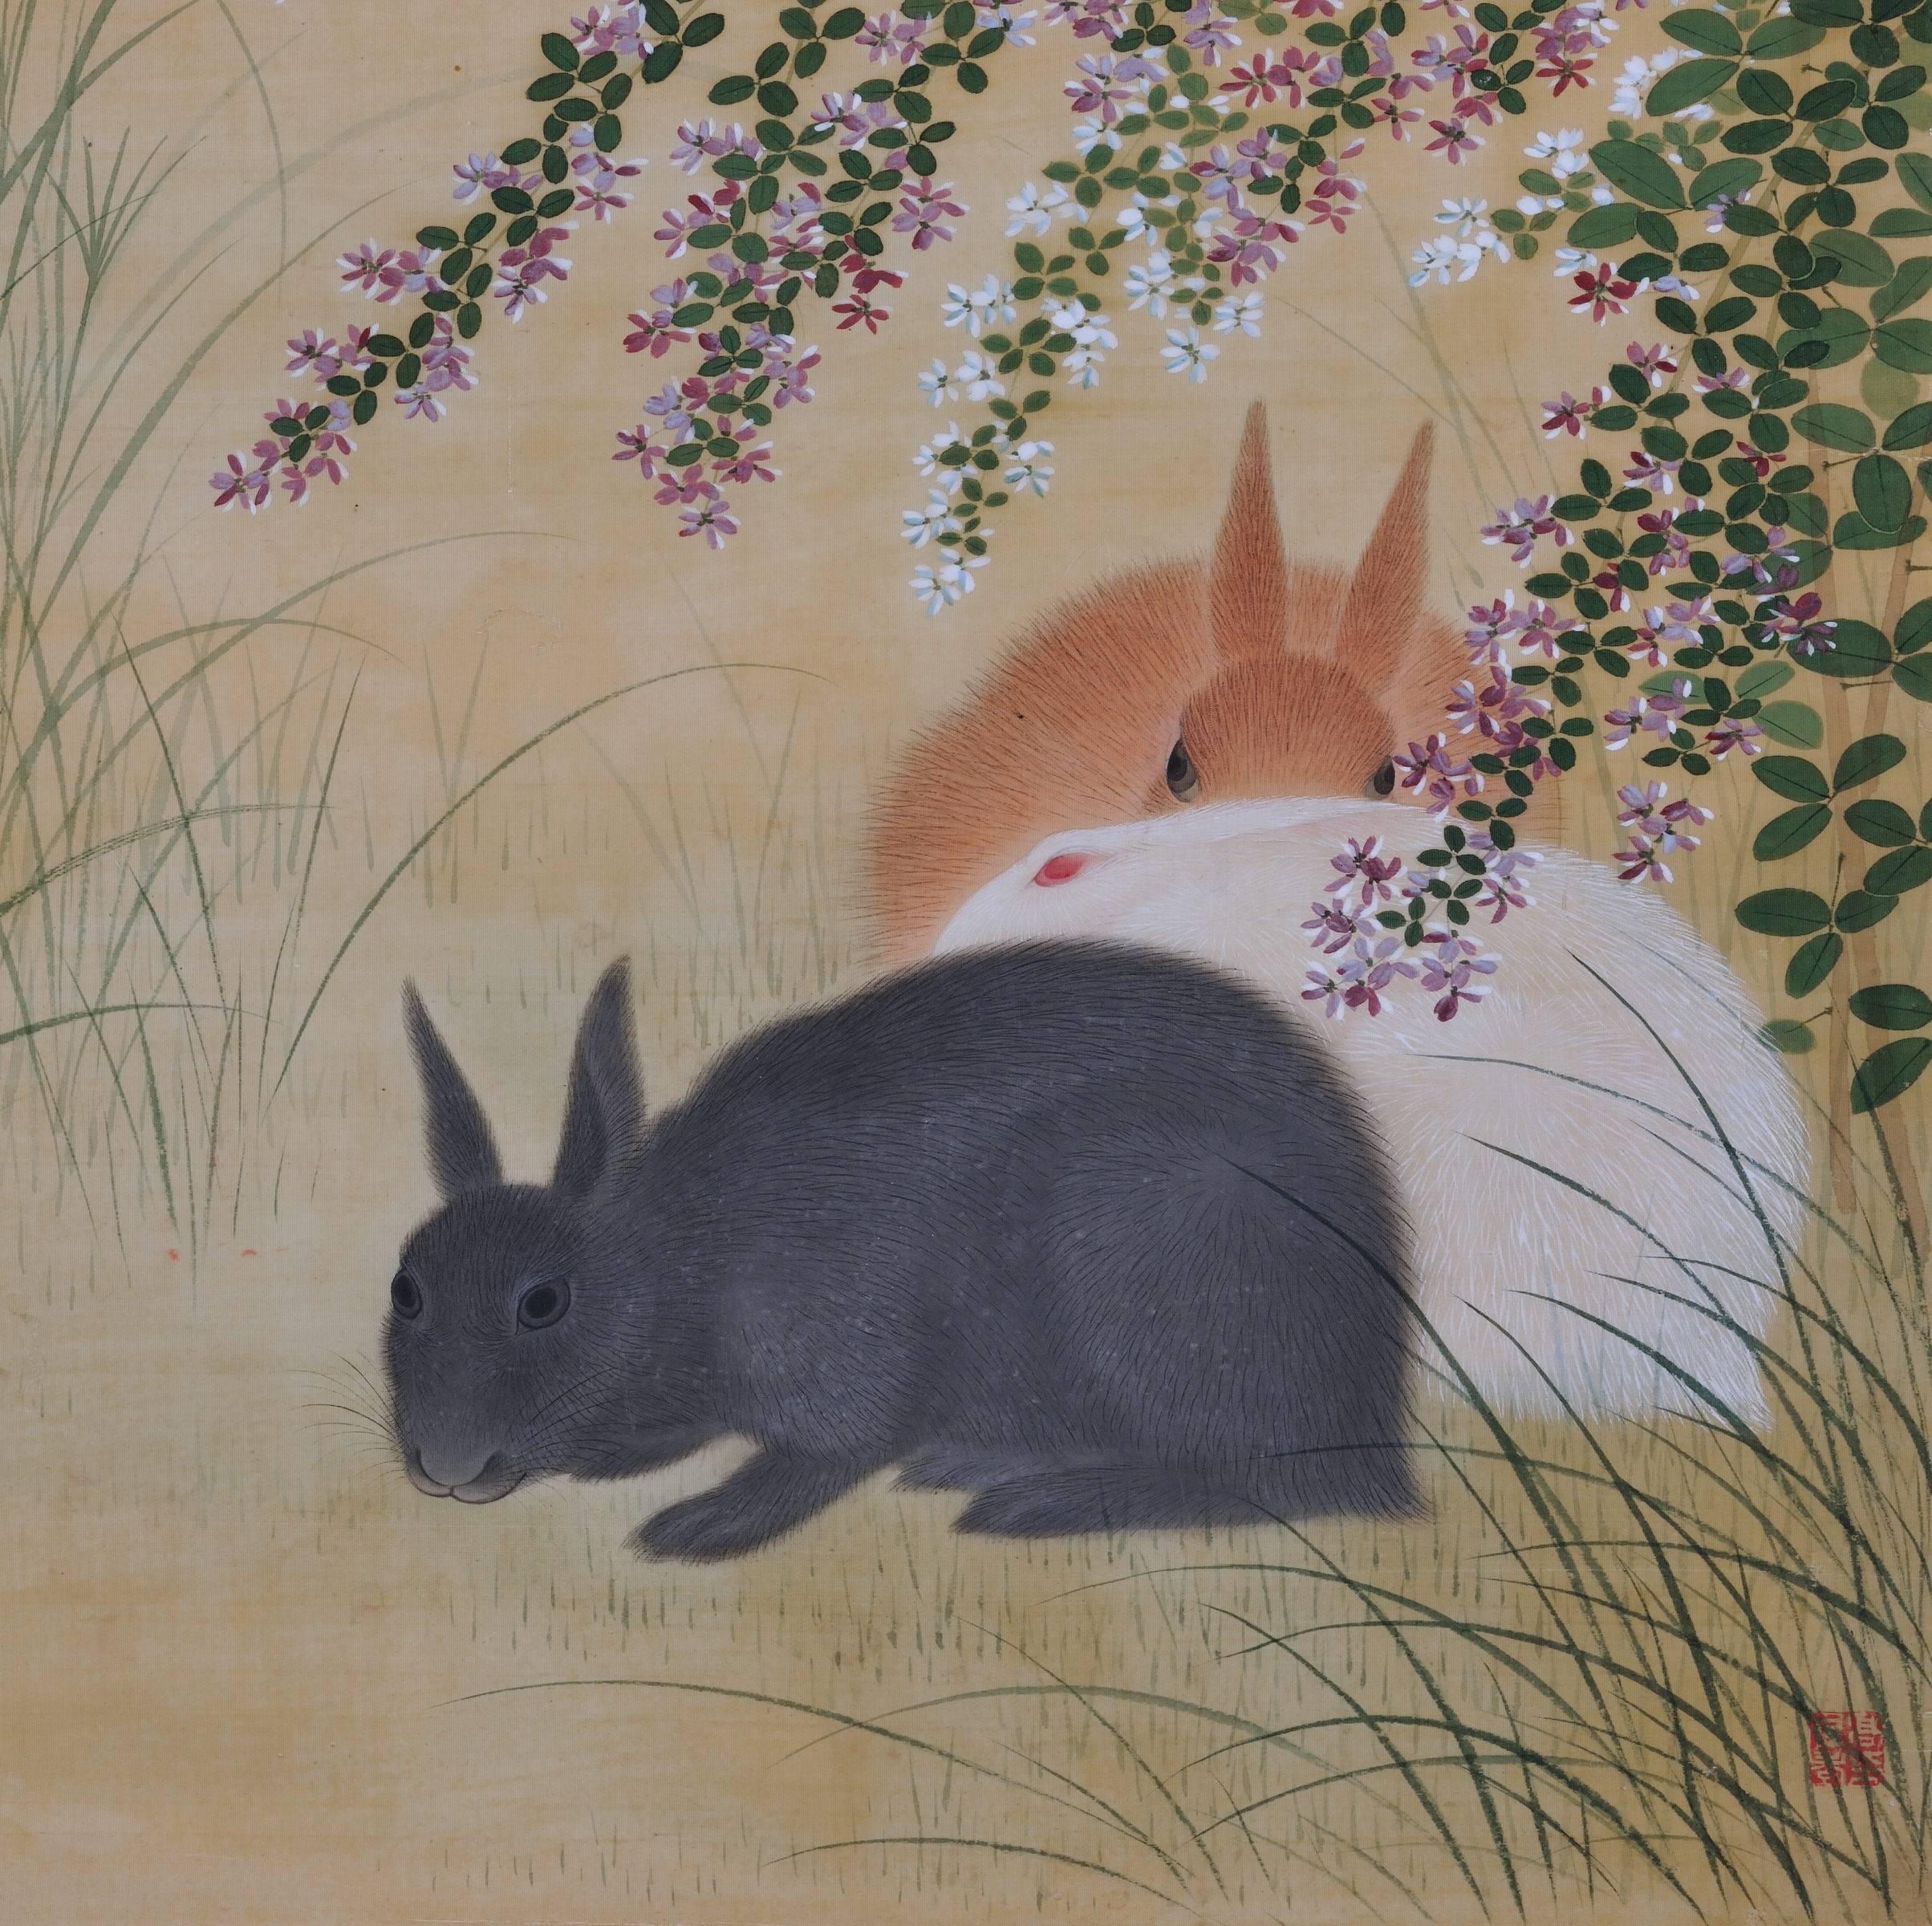 Takakura Zaiko (fl.1854-1860)

Birds and flowers of the seasons

Rabbits & Bush Clover

Ink and color on silk

Unframed

Seal: Taka Zaiko no in 

Dimensions:

H 39” x W 16.5” (100 cm x 42.5 cm)

Bird and flower paintings by the artist Takakura